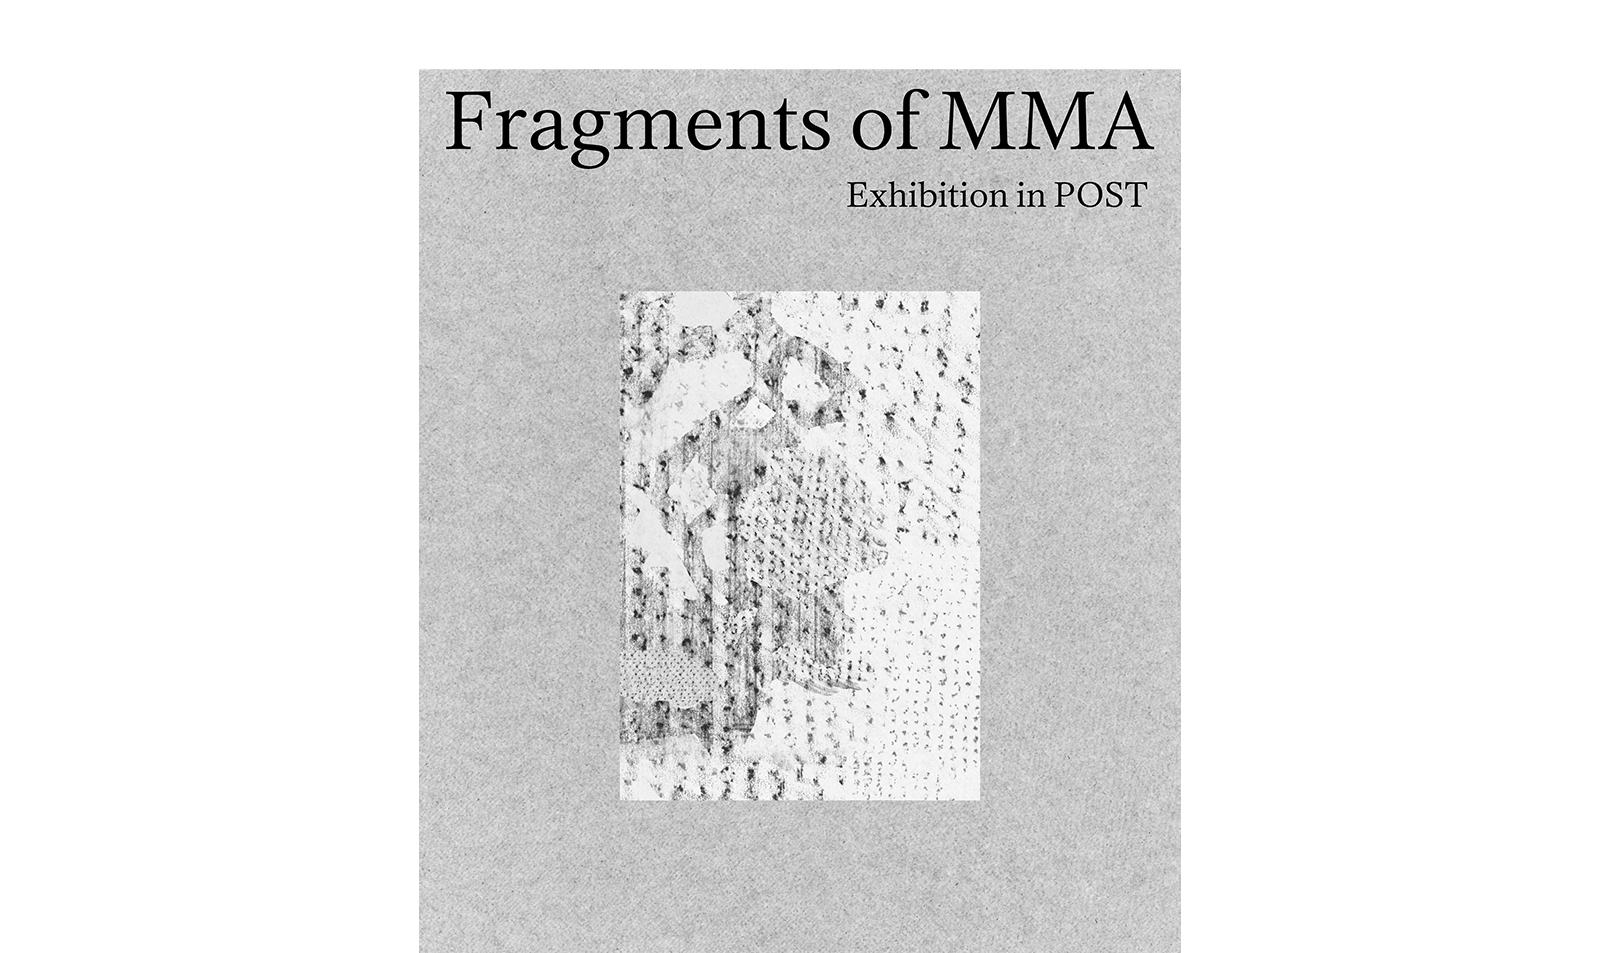 Fragments of MMA